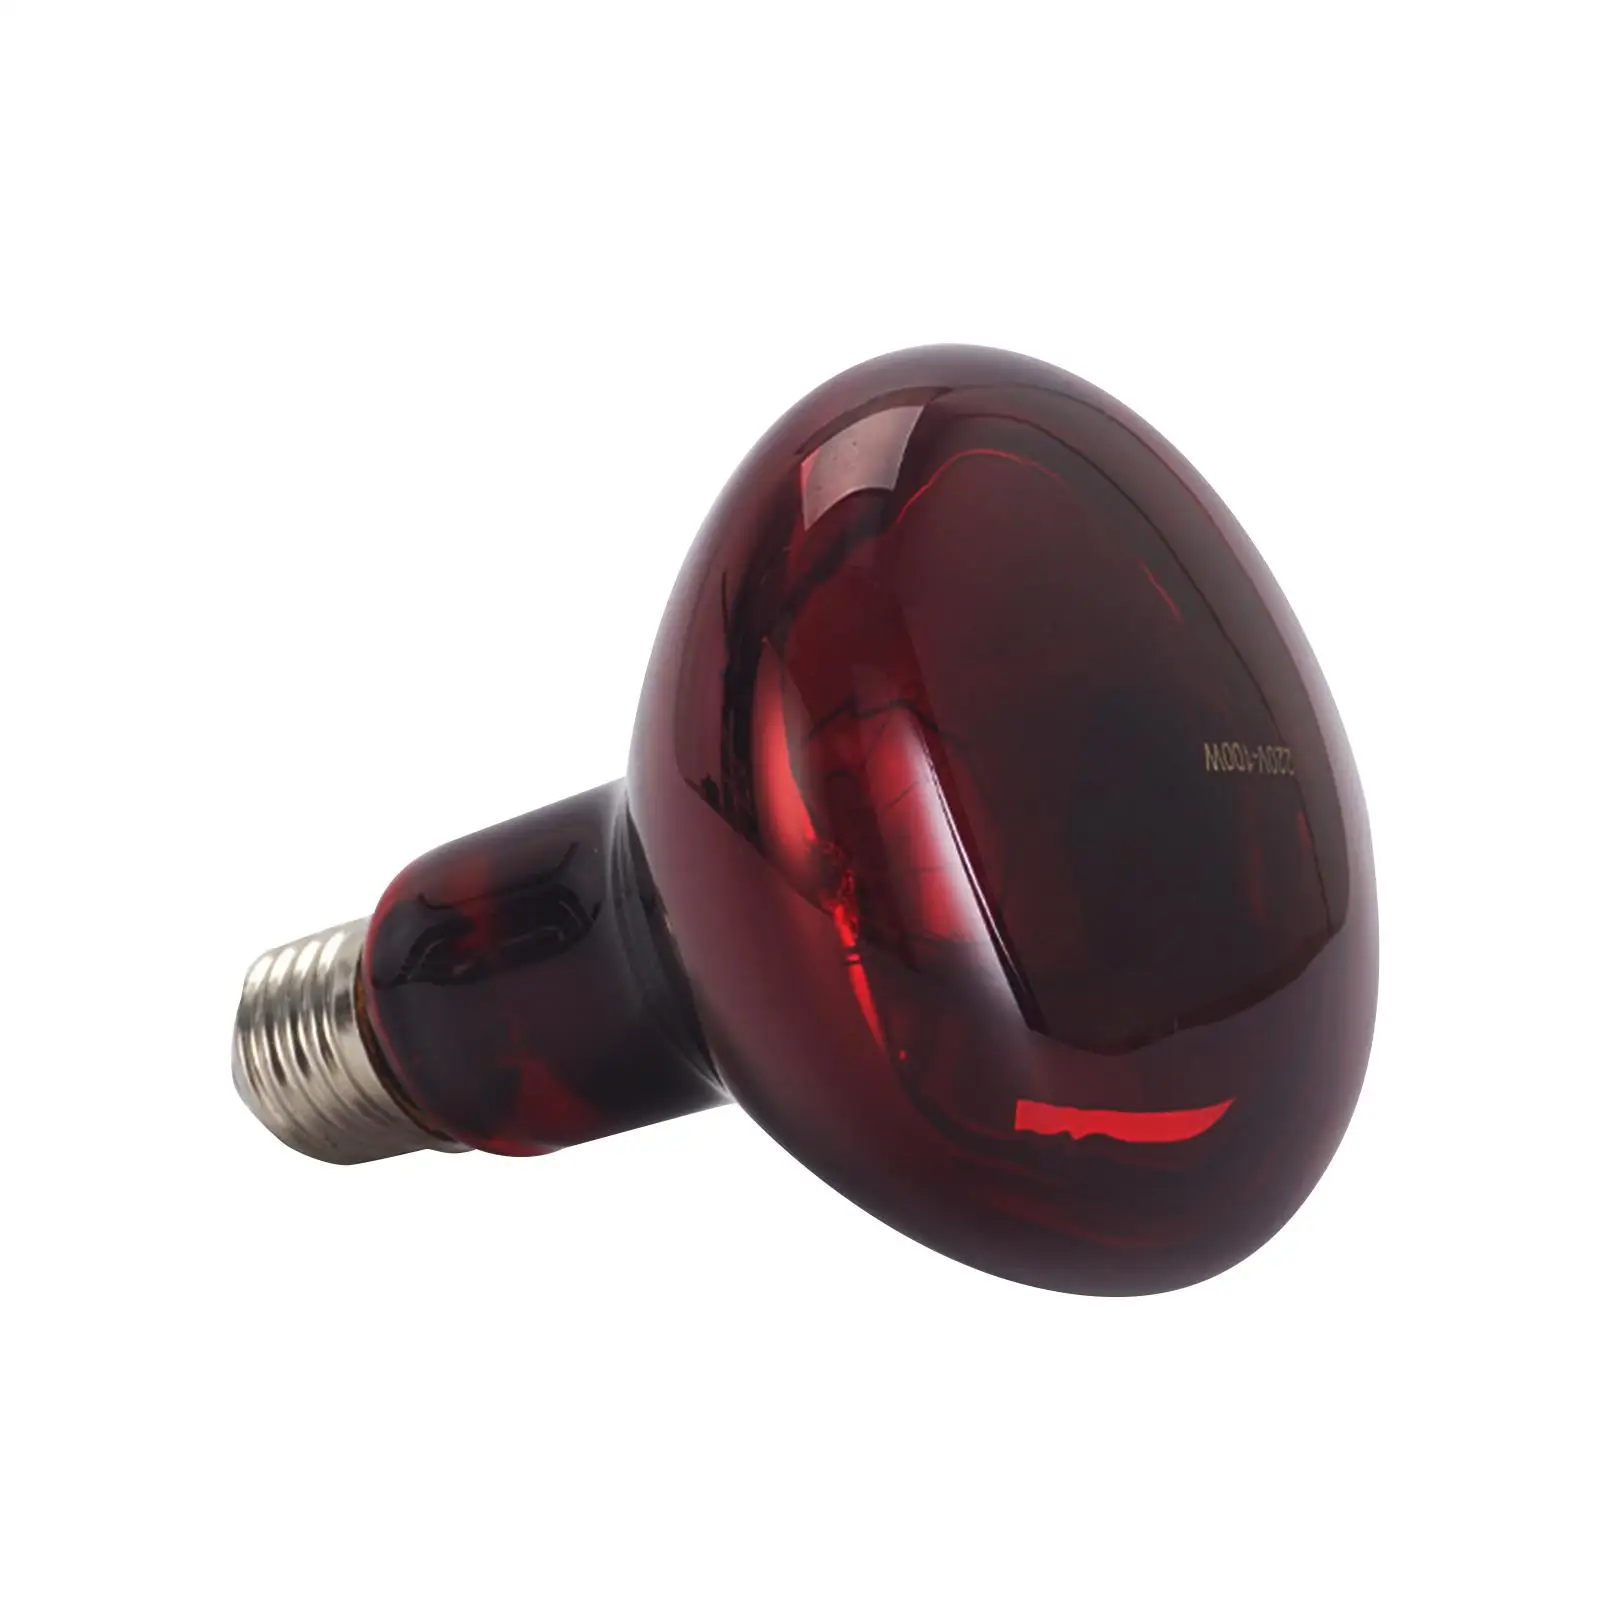 Red Reptile Light Bulb Pet Daylight 100W Infrared for Hedgehogs Amphibians